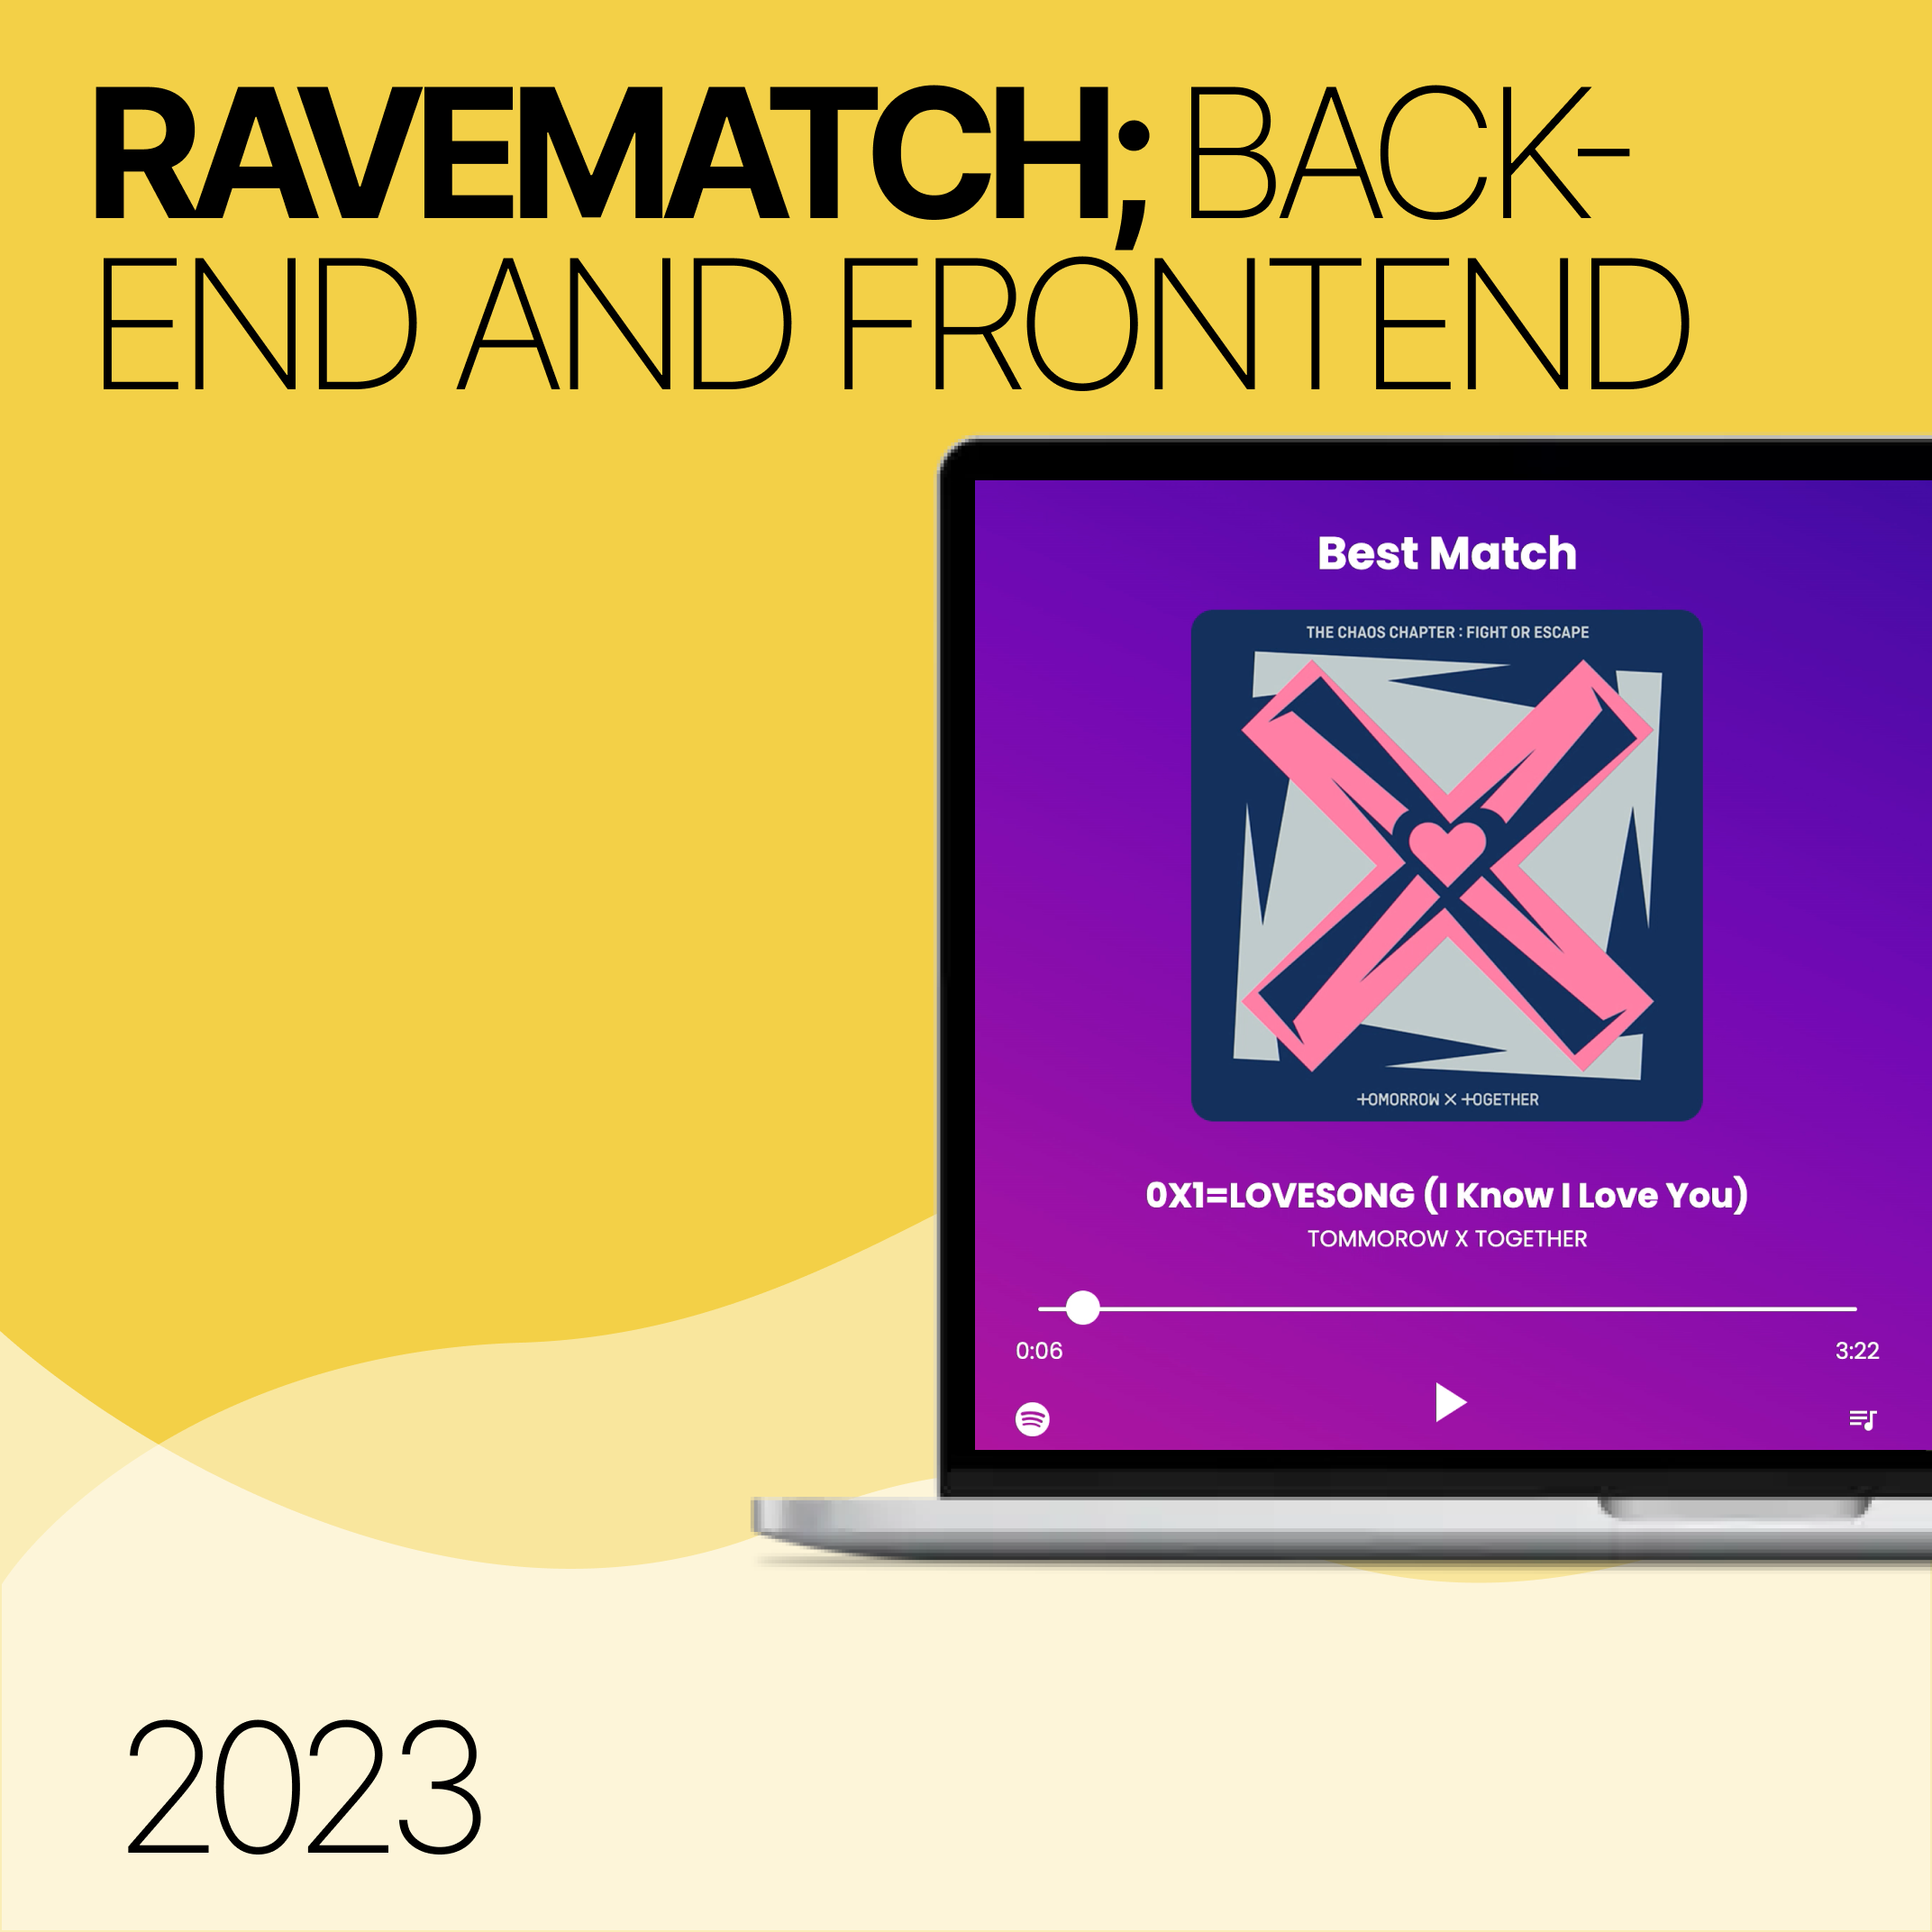 Ravematch: Backend and Frontend